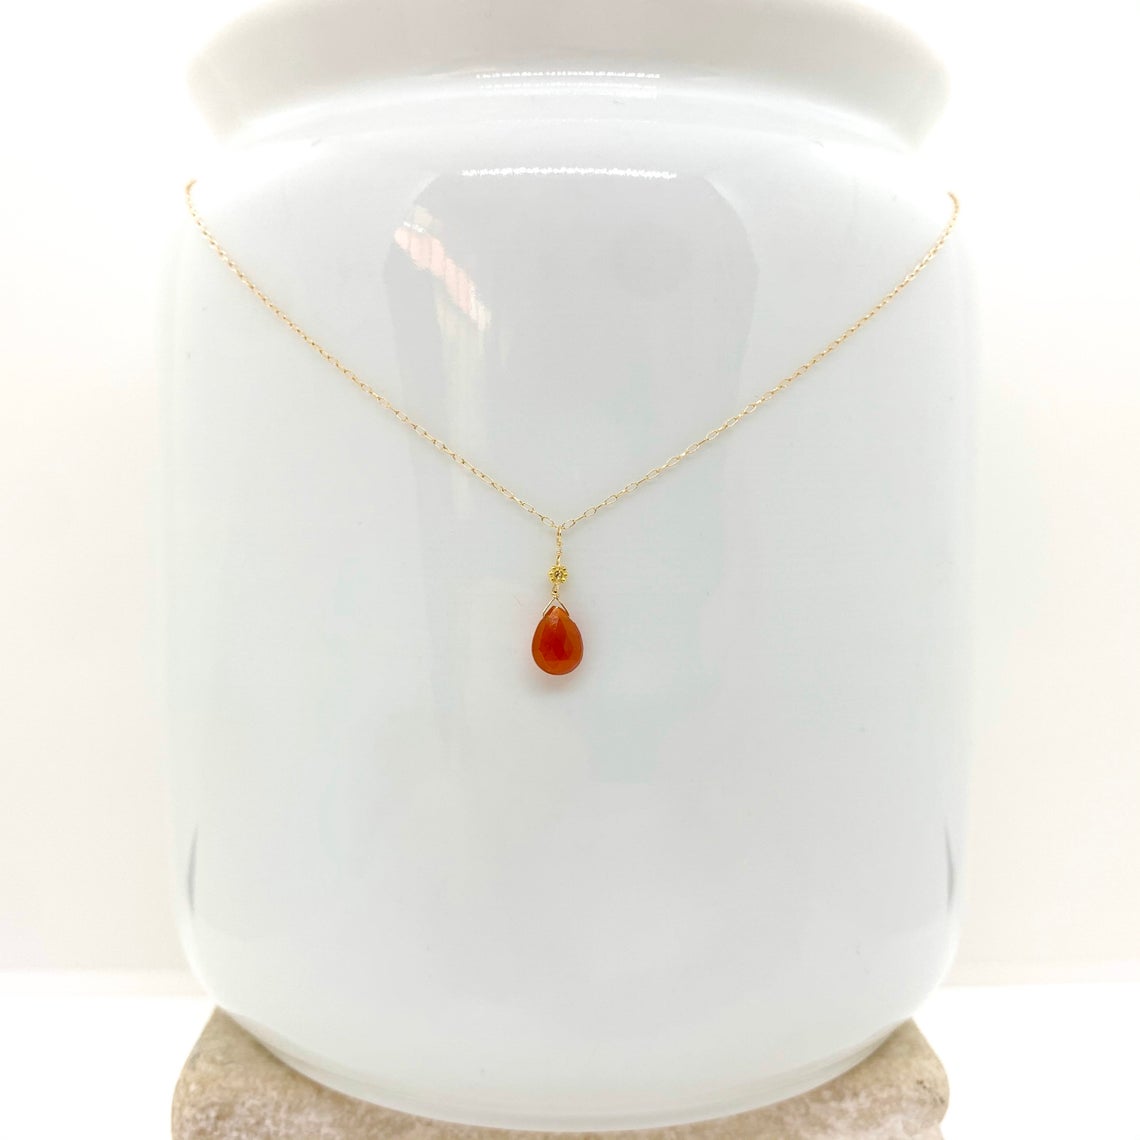 14k Gold Chain Necklace w/ Mexican Fire Opal, 18k Gold Daisy & Antique Italian Bead